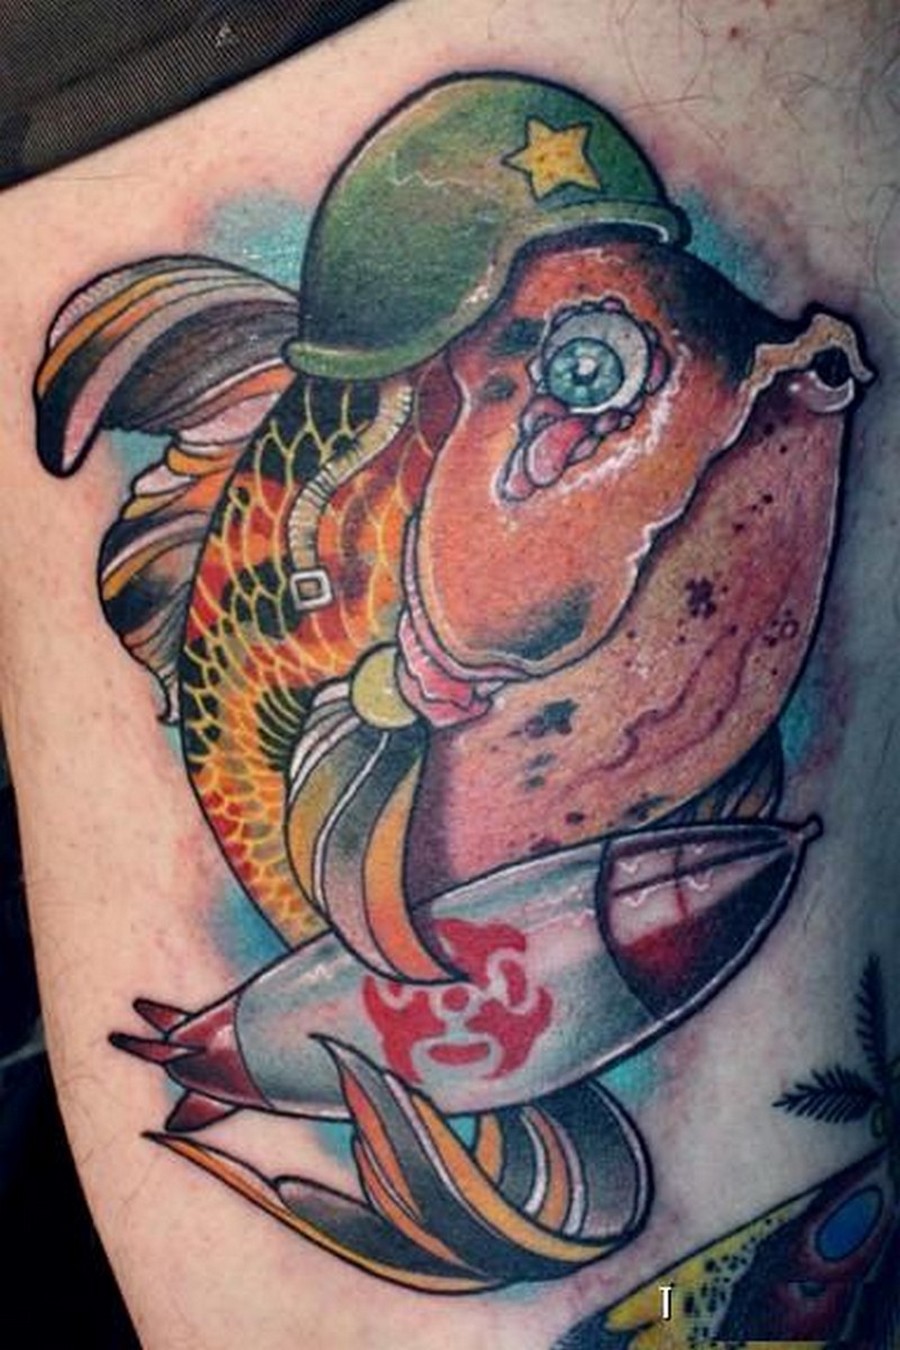 Fish Tattoos Designs, Ideas and Meaning | Tattoos For You